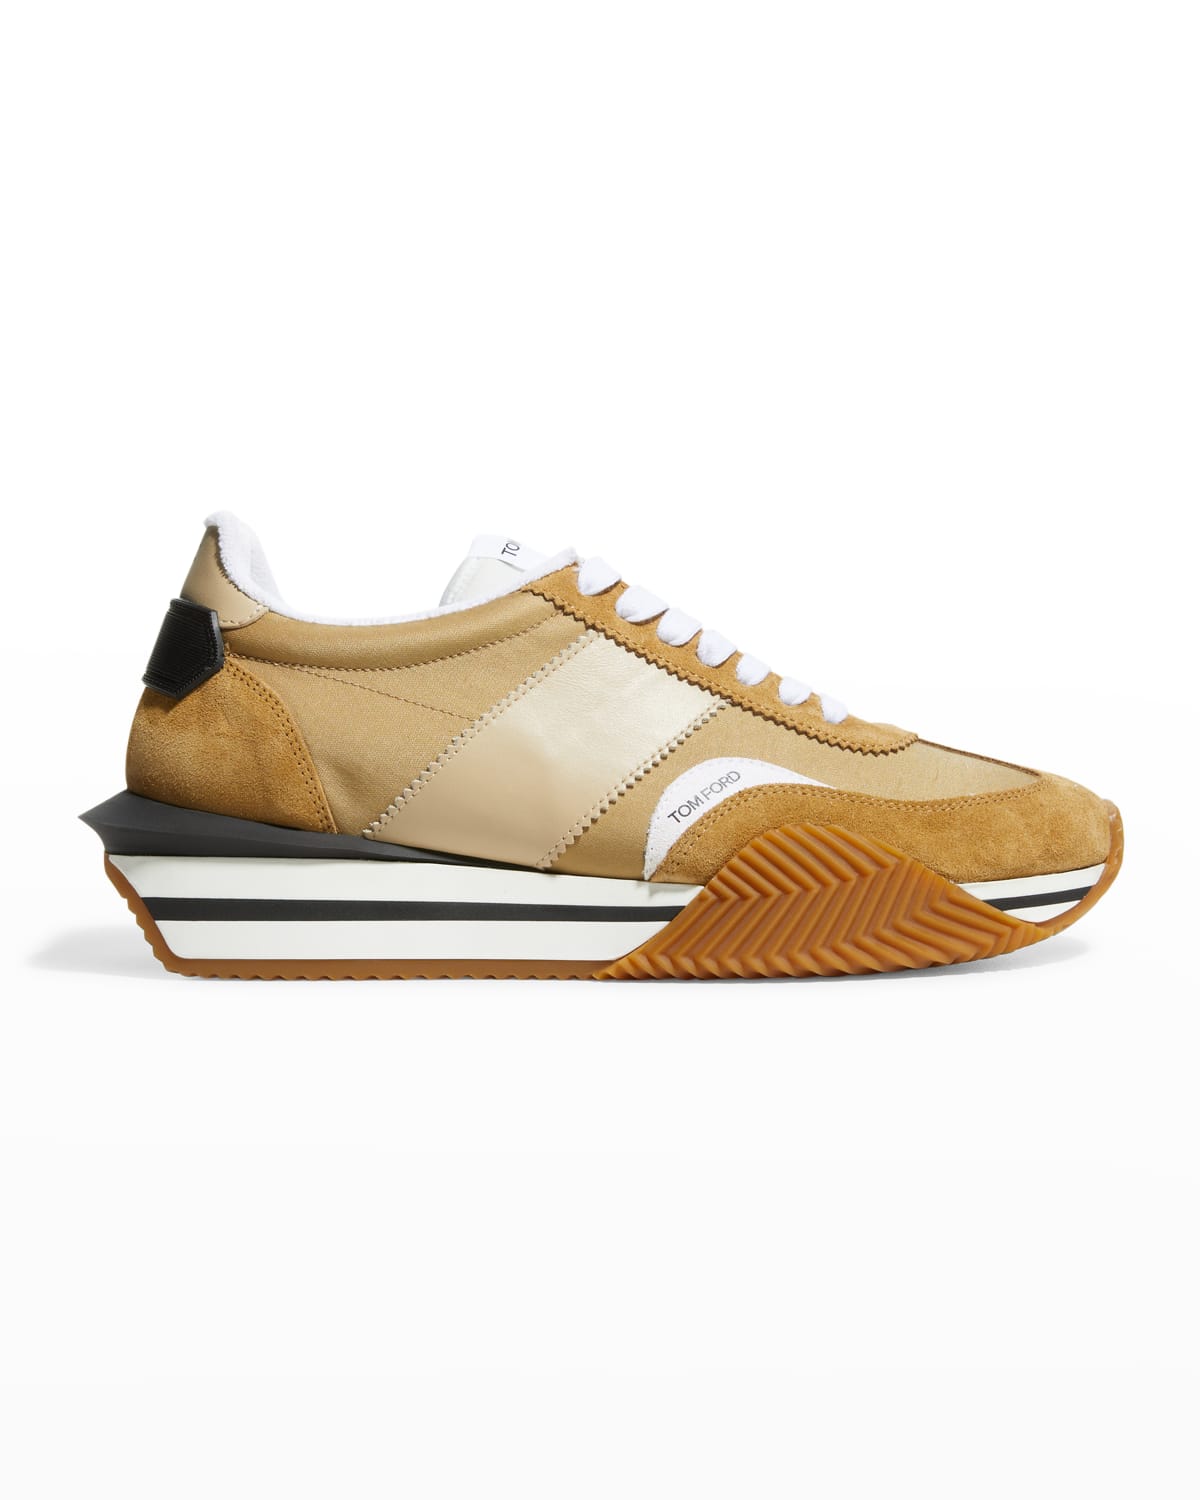 Tom Ford Suede Sneakers | Neiman Marcus